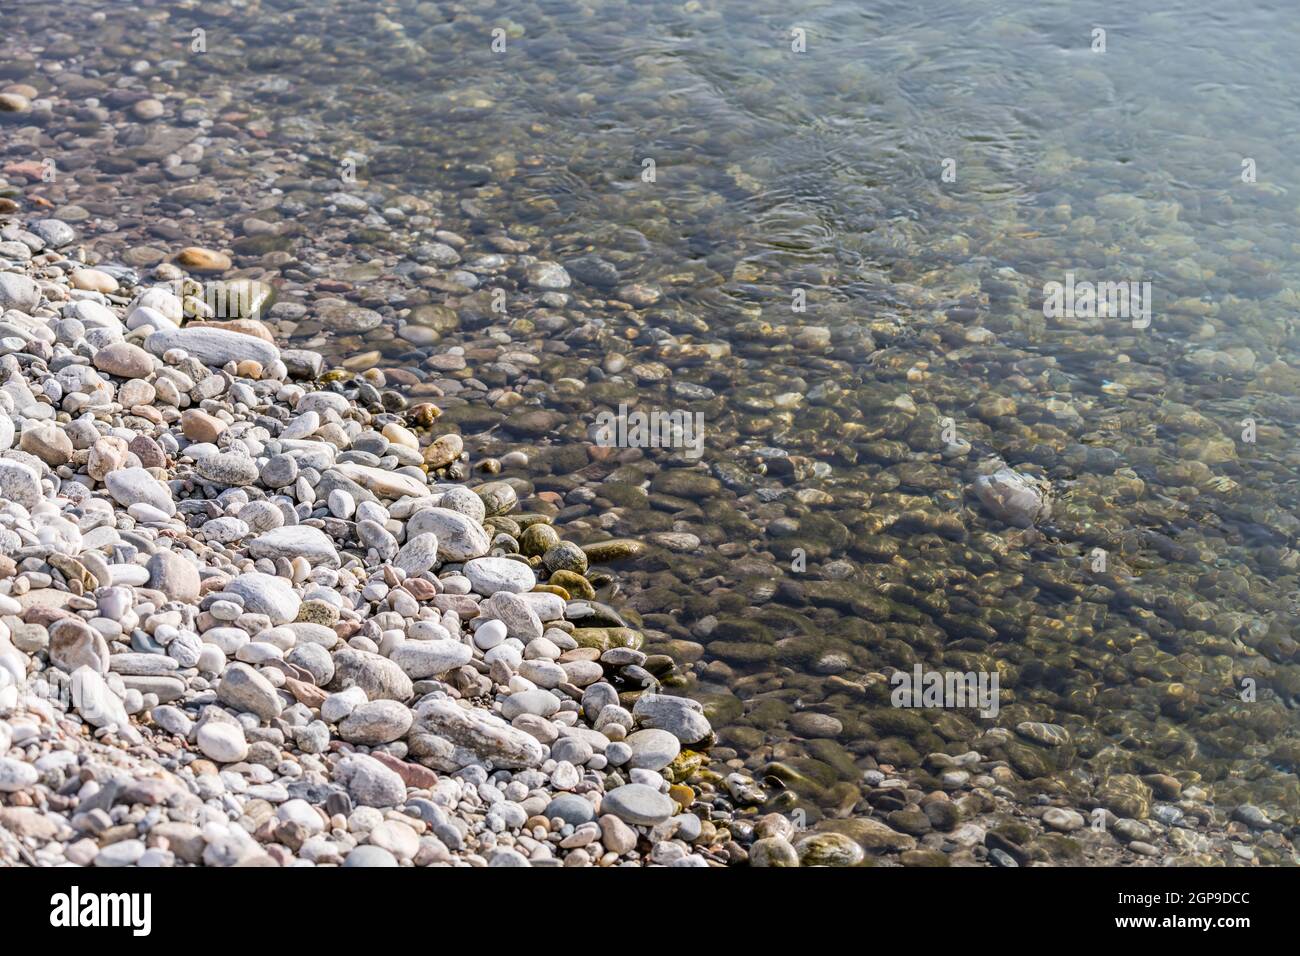 detail of white pebbles and clear waters on shore at Ticino river, shot on bright winter day near Bereguardo, Pavia, Lombardy, Italy Stock Photo